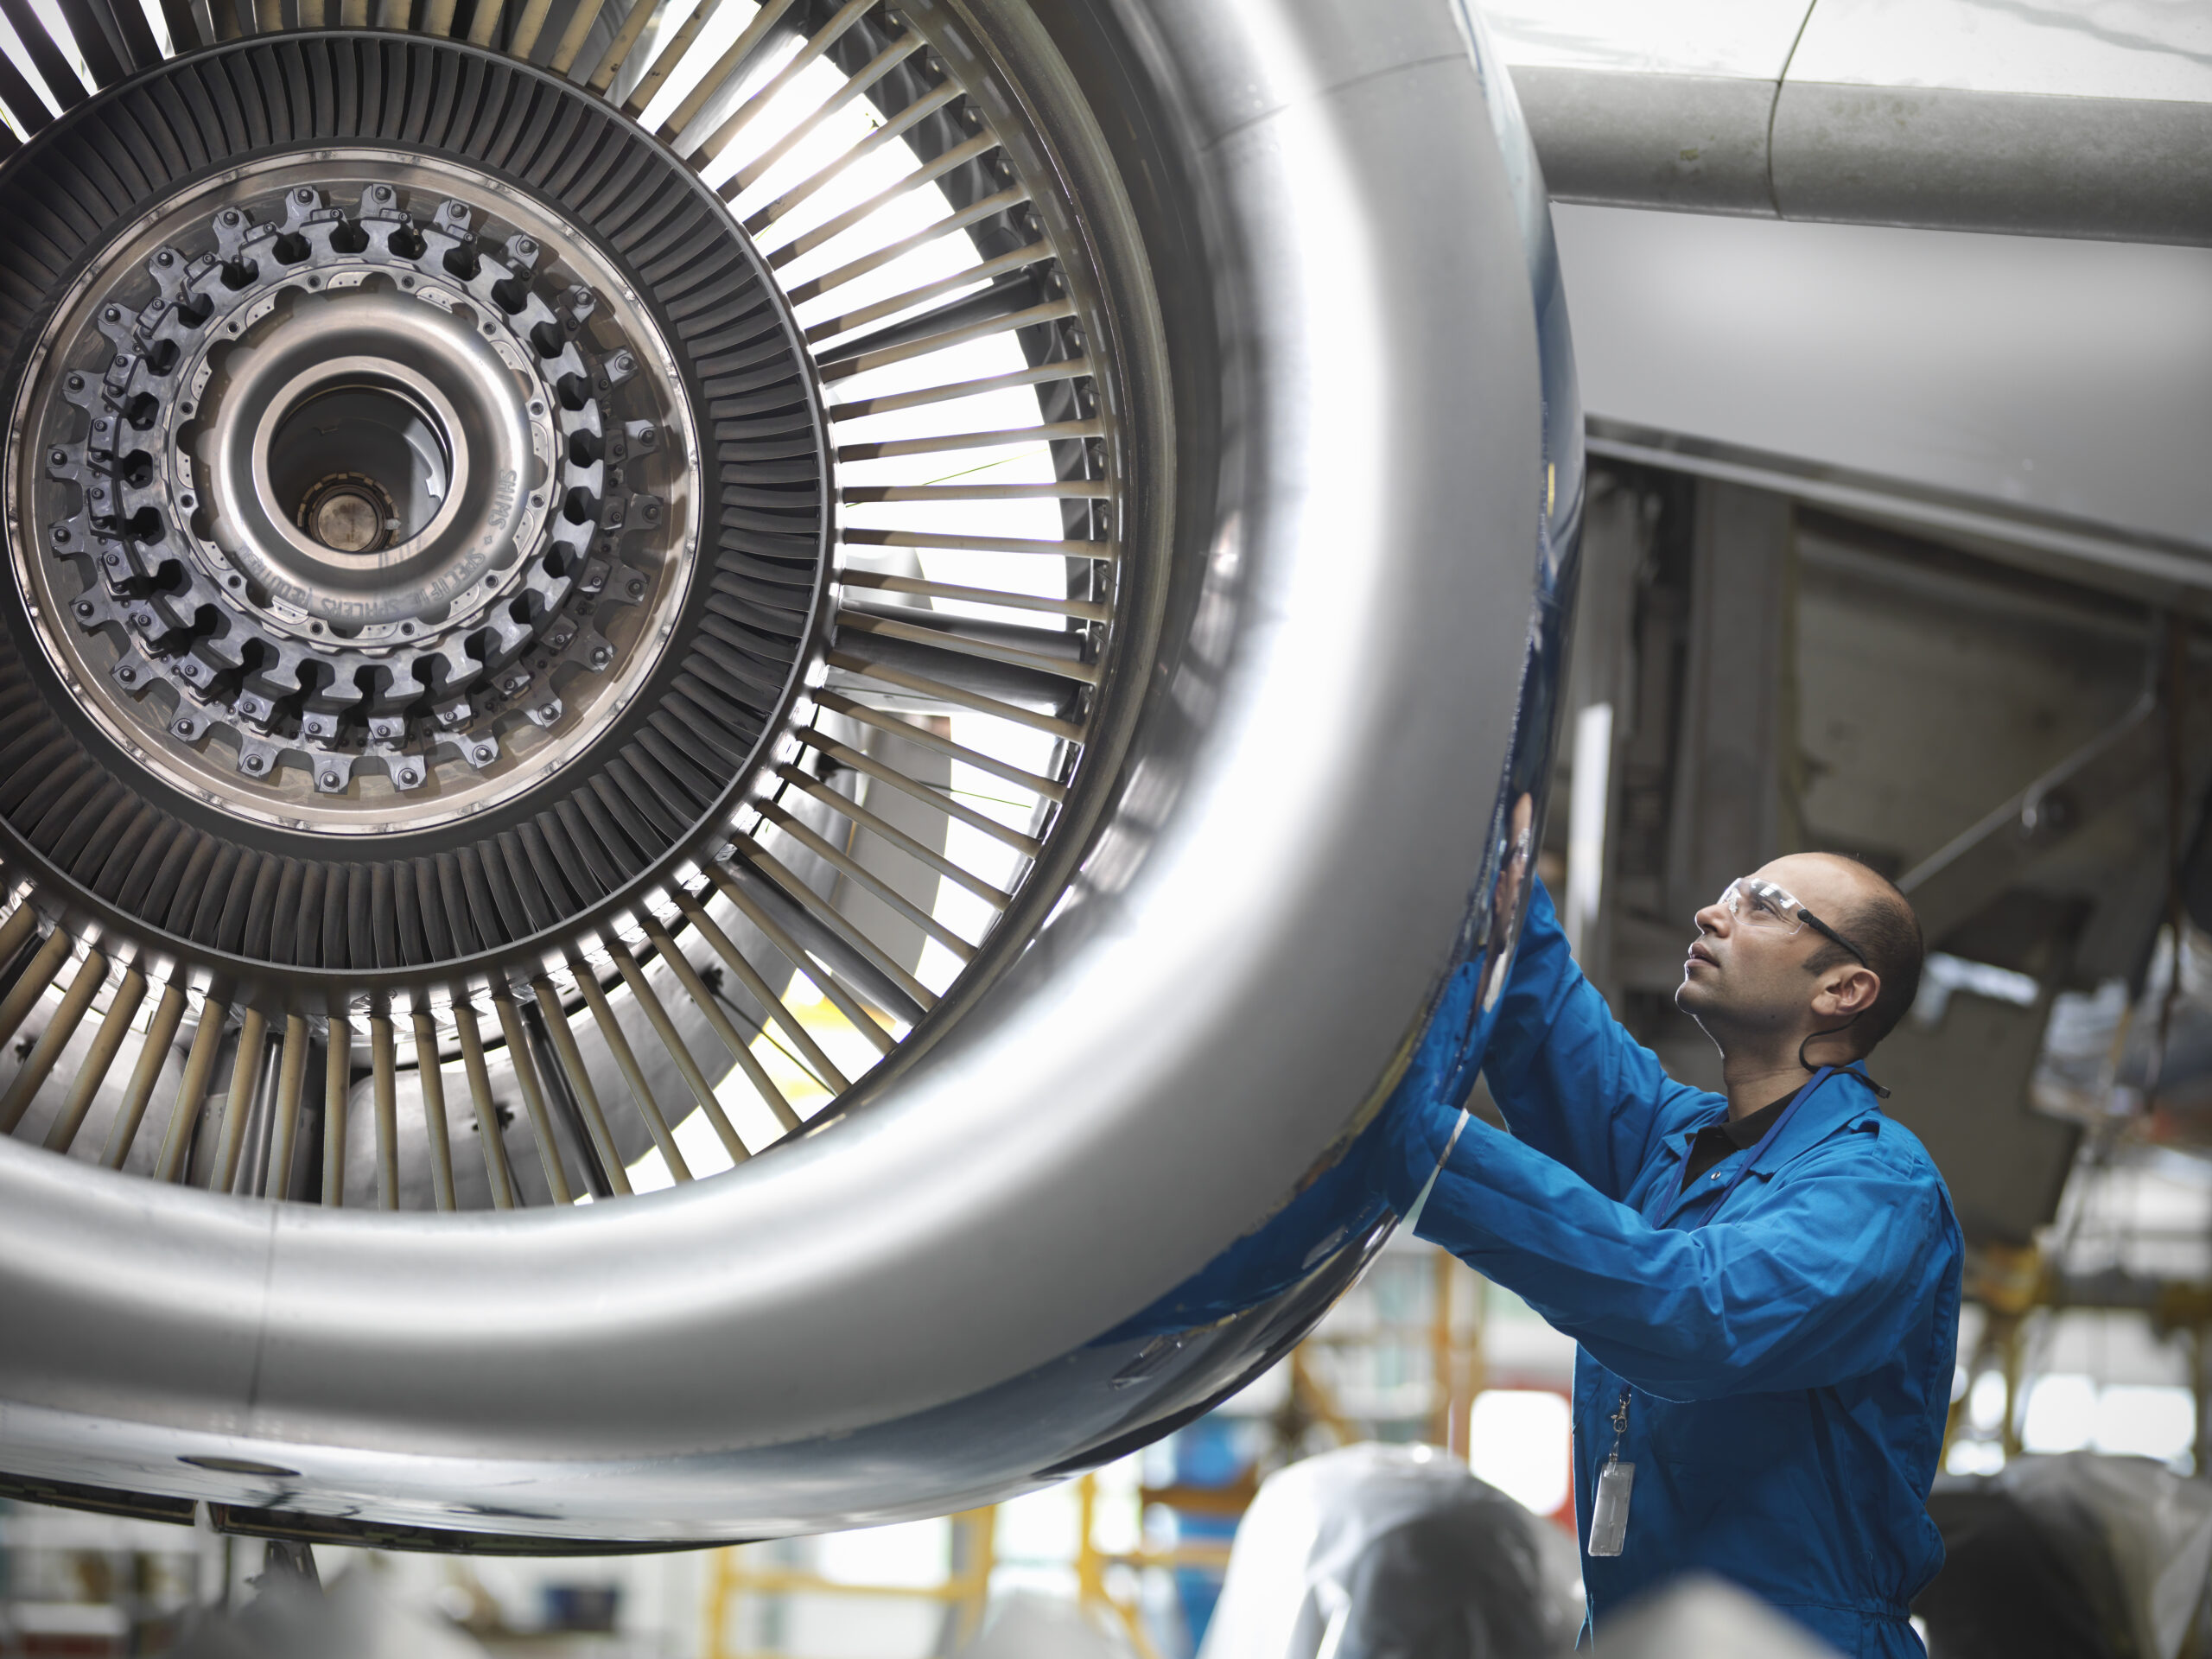 aircraft-engineer-working-on-737-jet-engine-in-airport